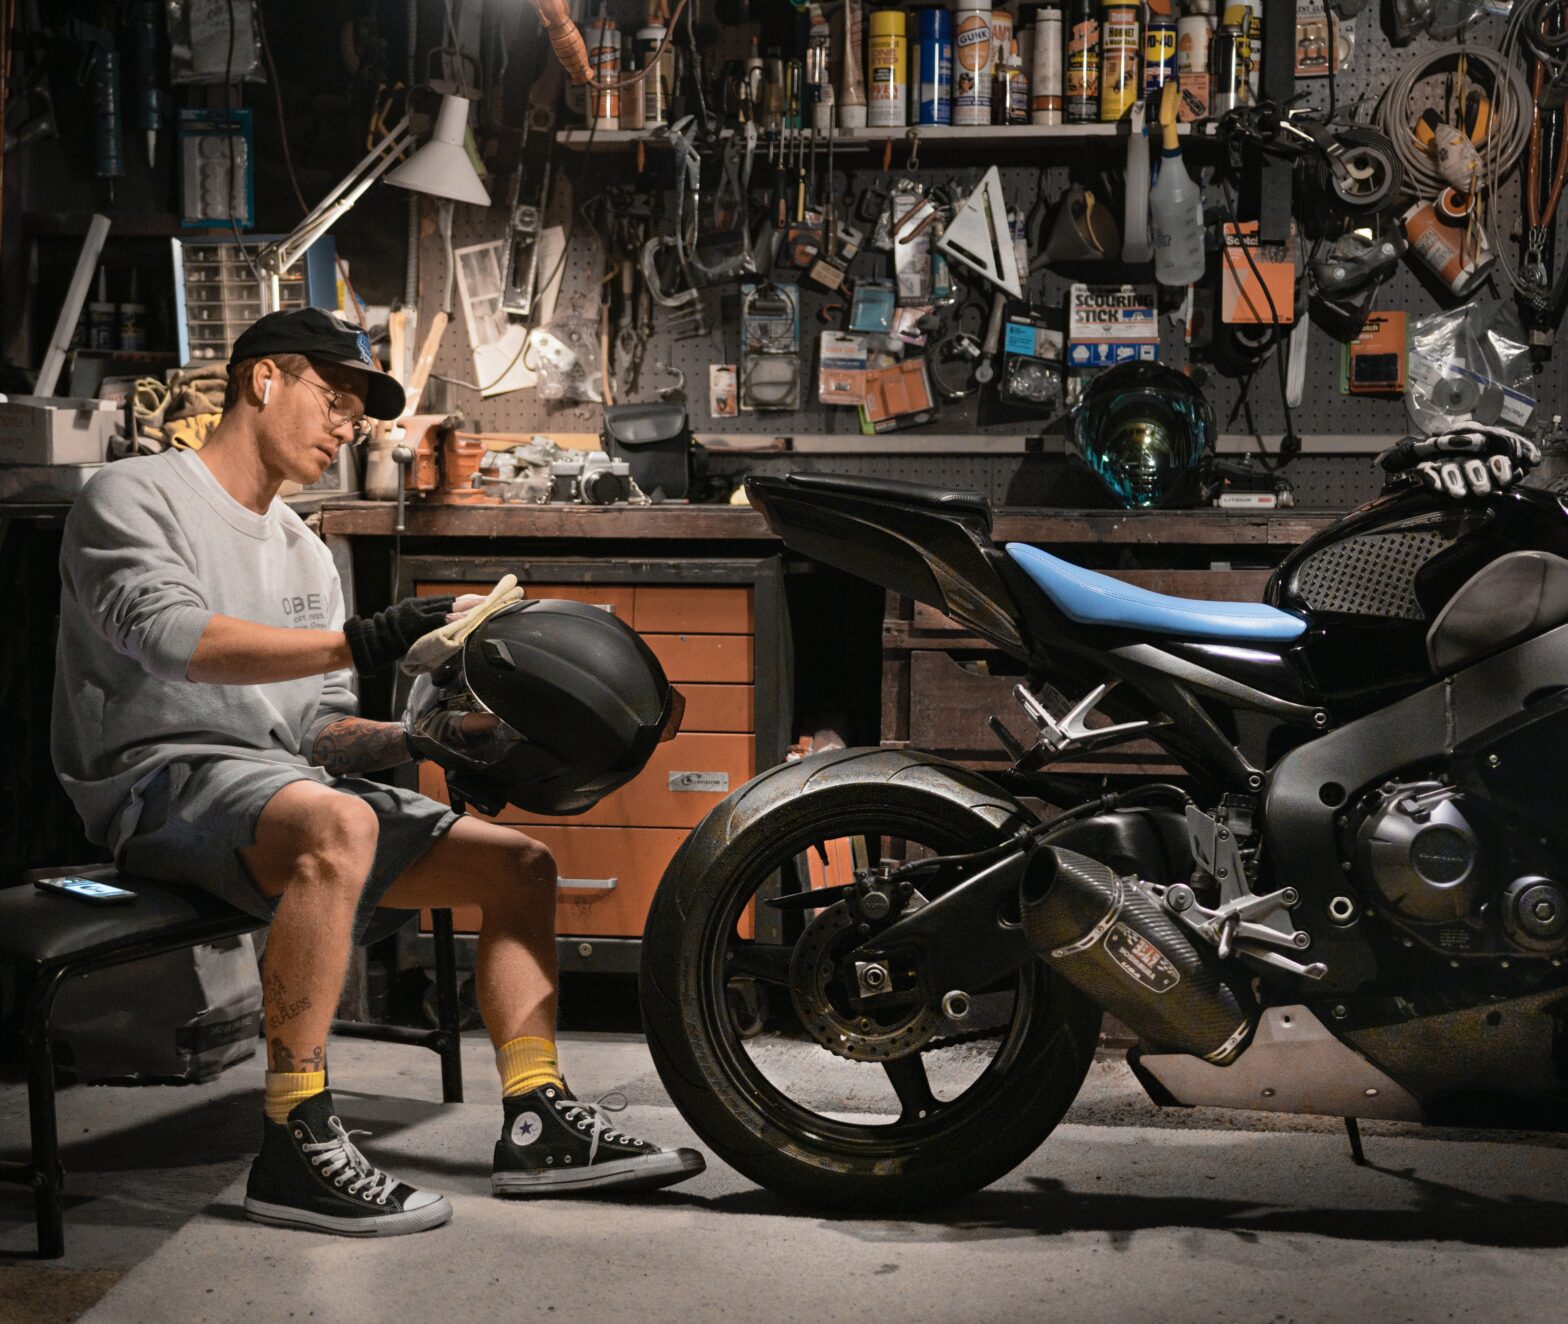 How to prepare your motorcycle for winter storage